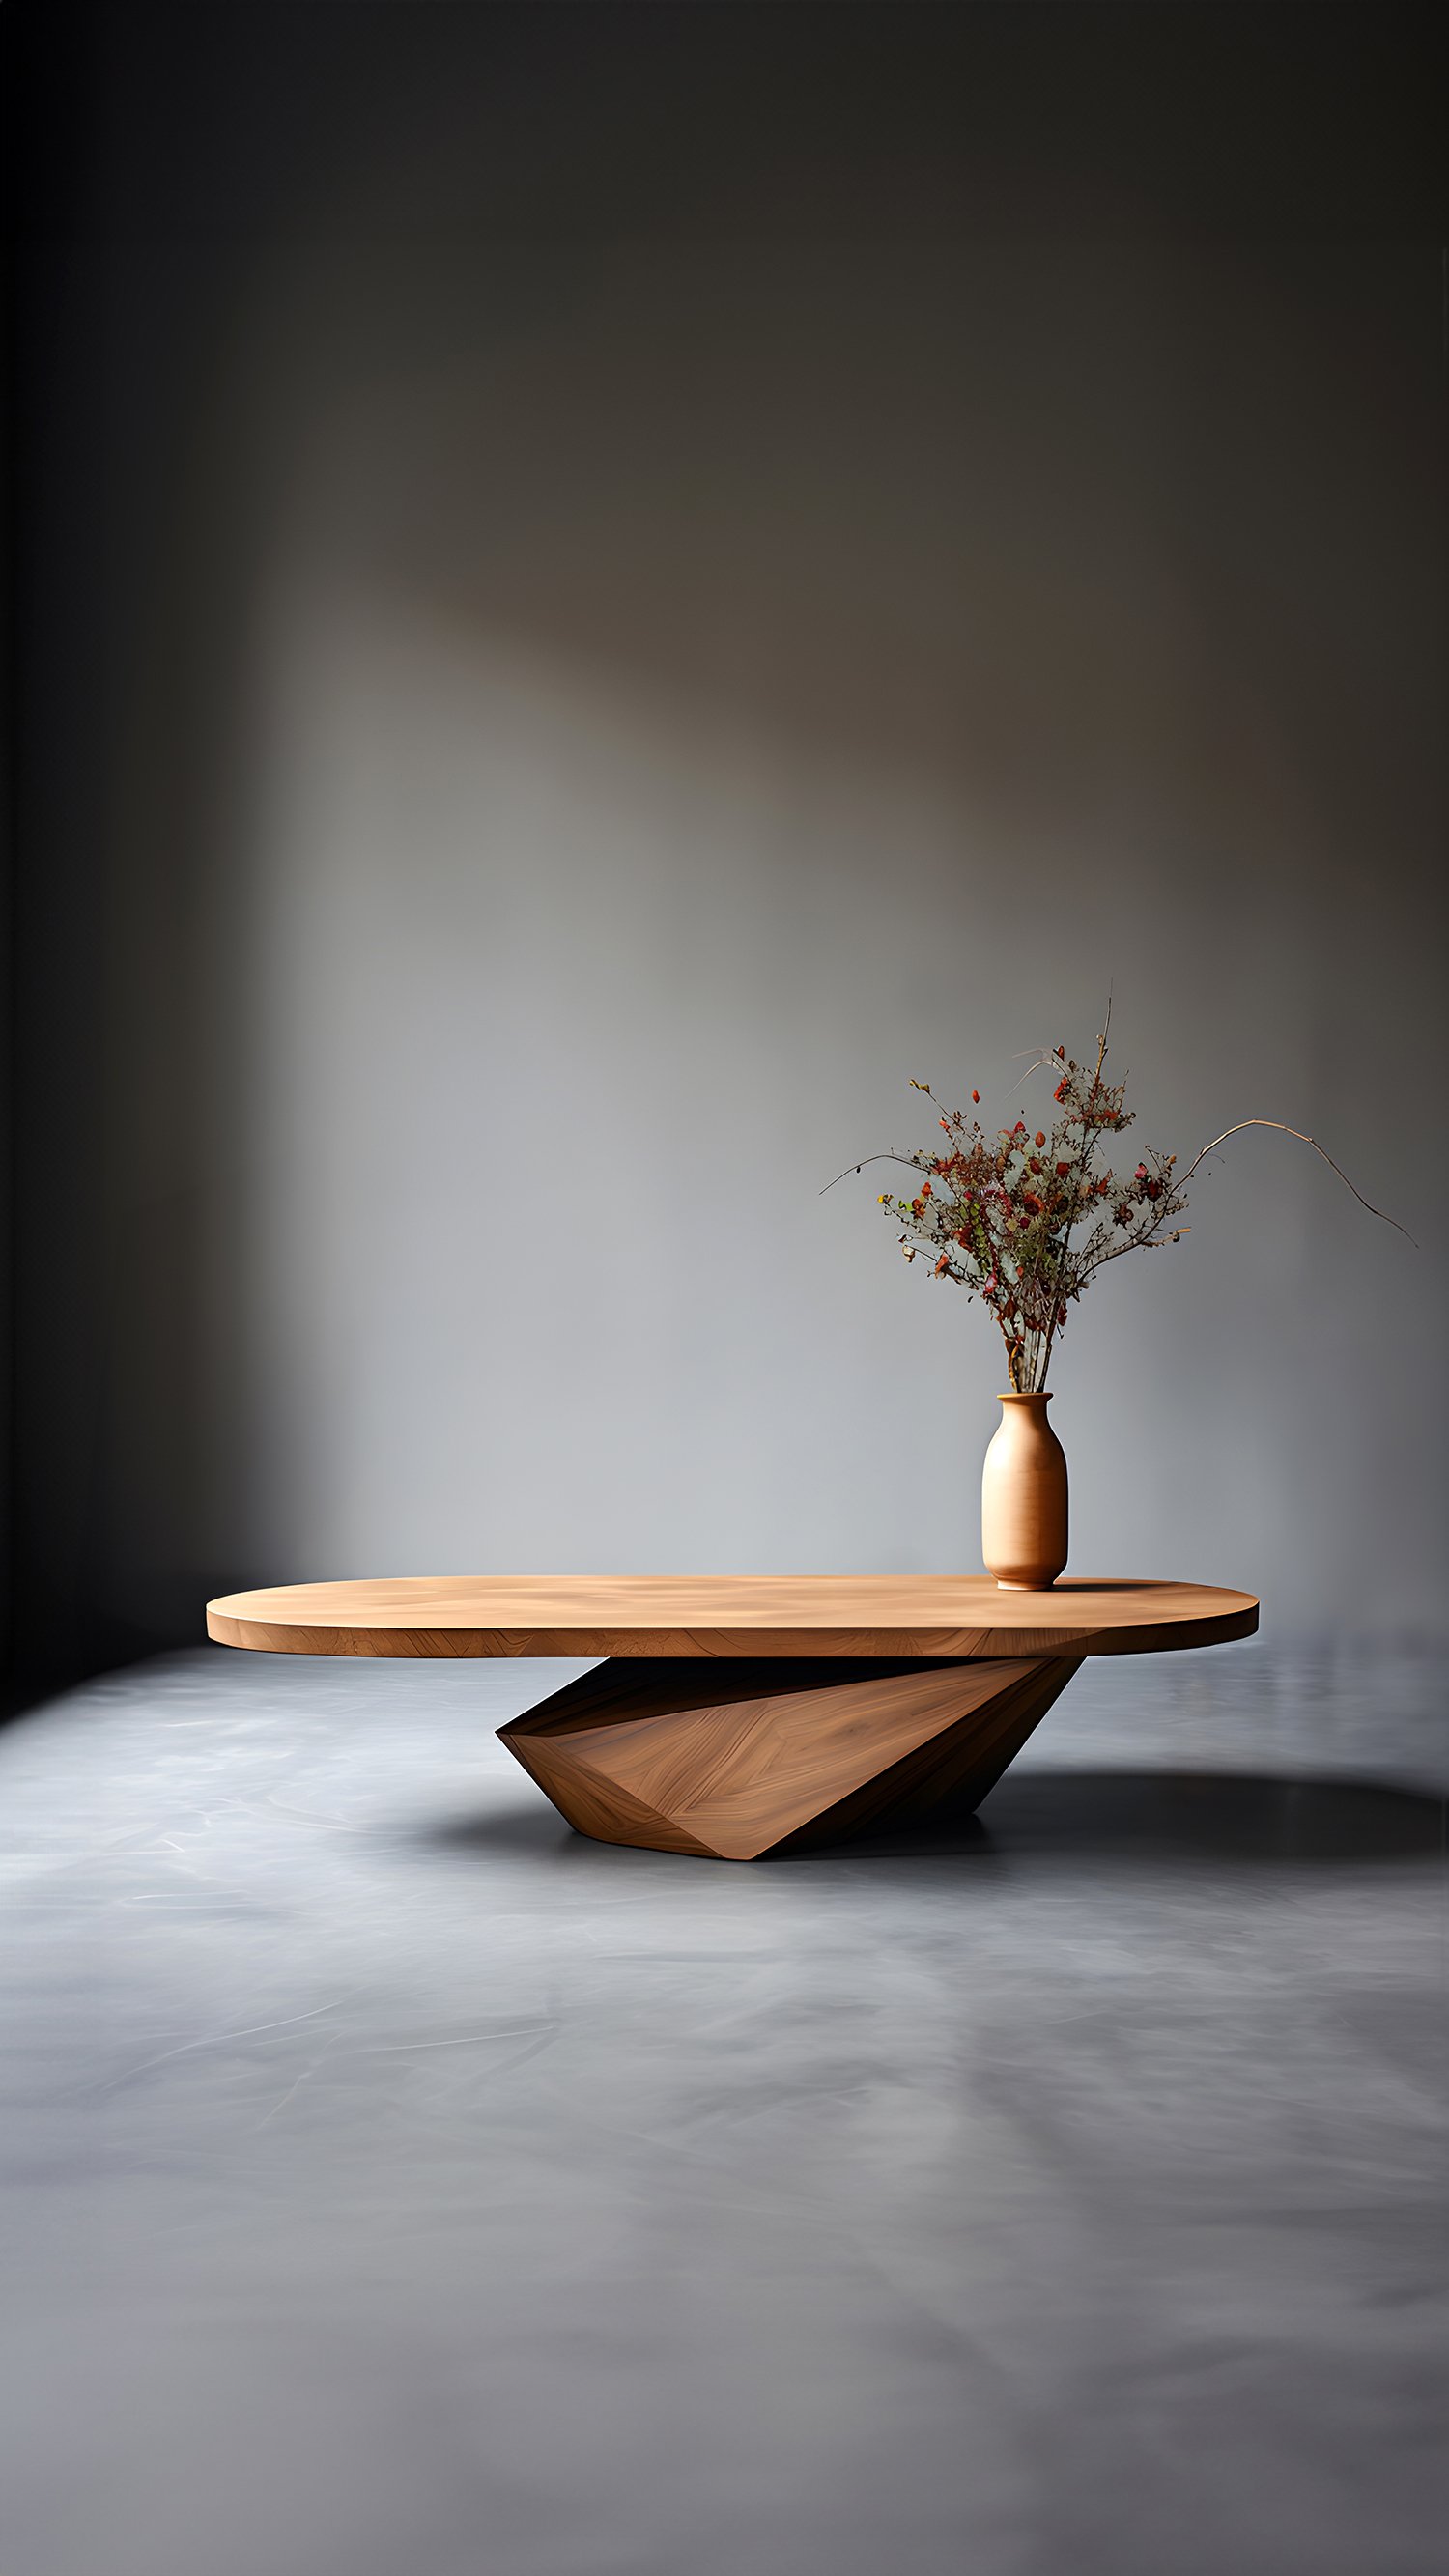 Sculptural Coffee Table Made of Solid Wood, Center Table Solace S25 by Joel Escalona — 10.jpg